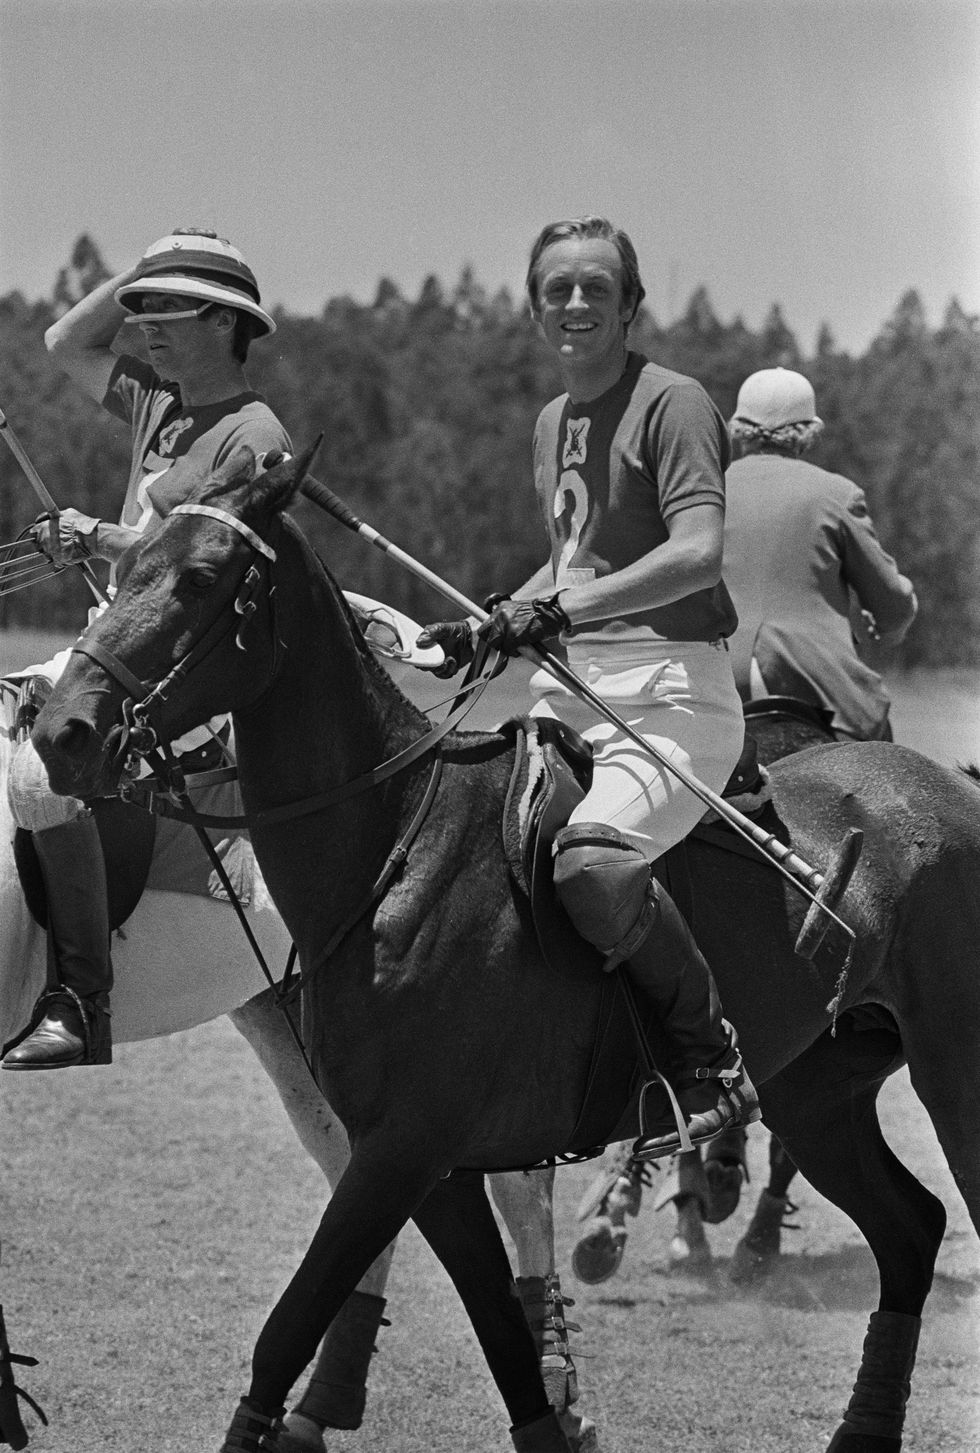 british army officer andrew parker bowles playing polo in kenya, 1971 photo by anwar husseingetty images